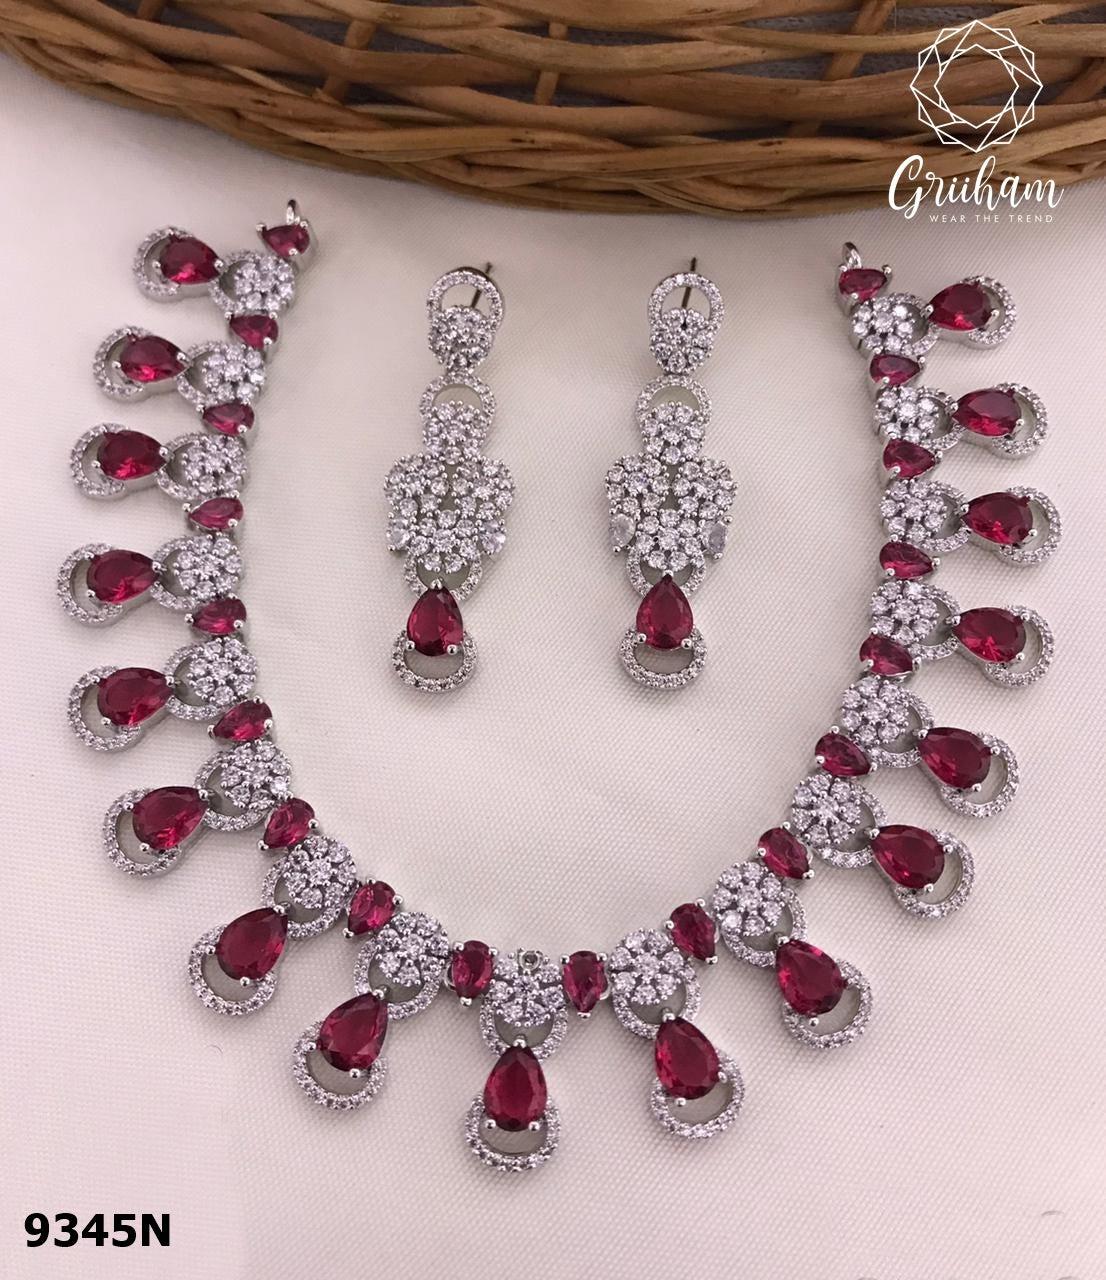 Rose Gold finish Evergreen Trending designs with red stones Short AD necklace set 9345n-Necklace Set-Kanakam-Griiham